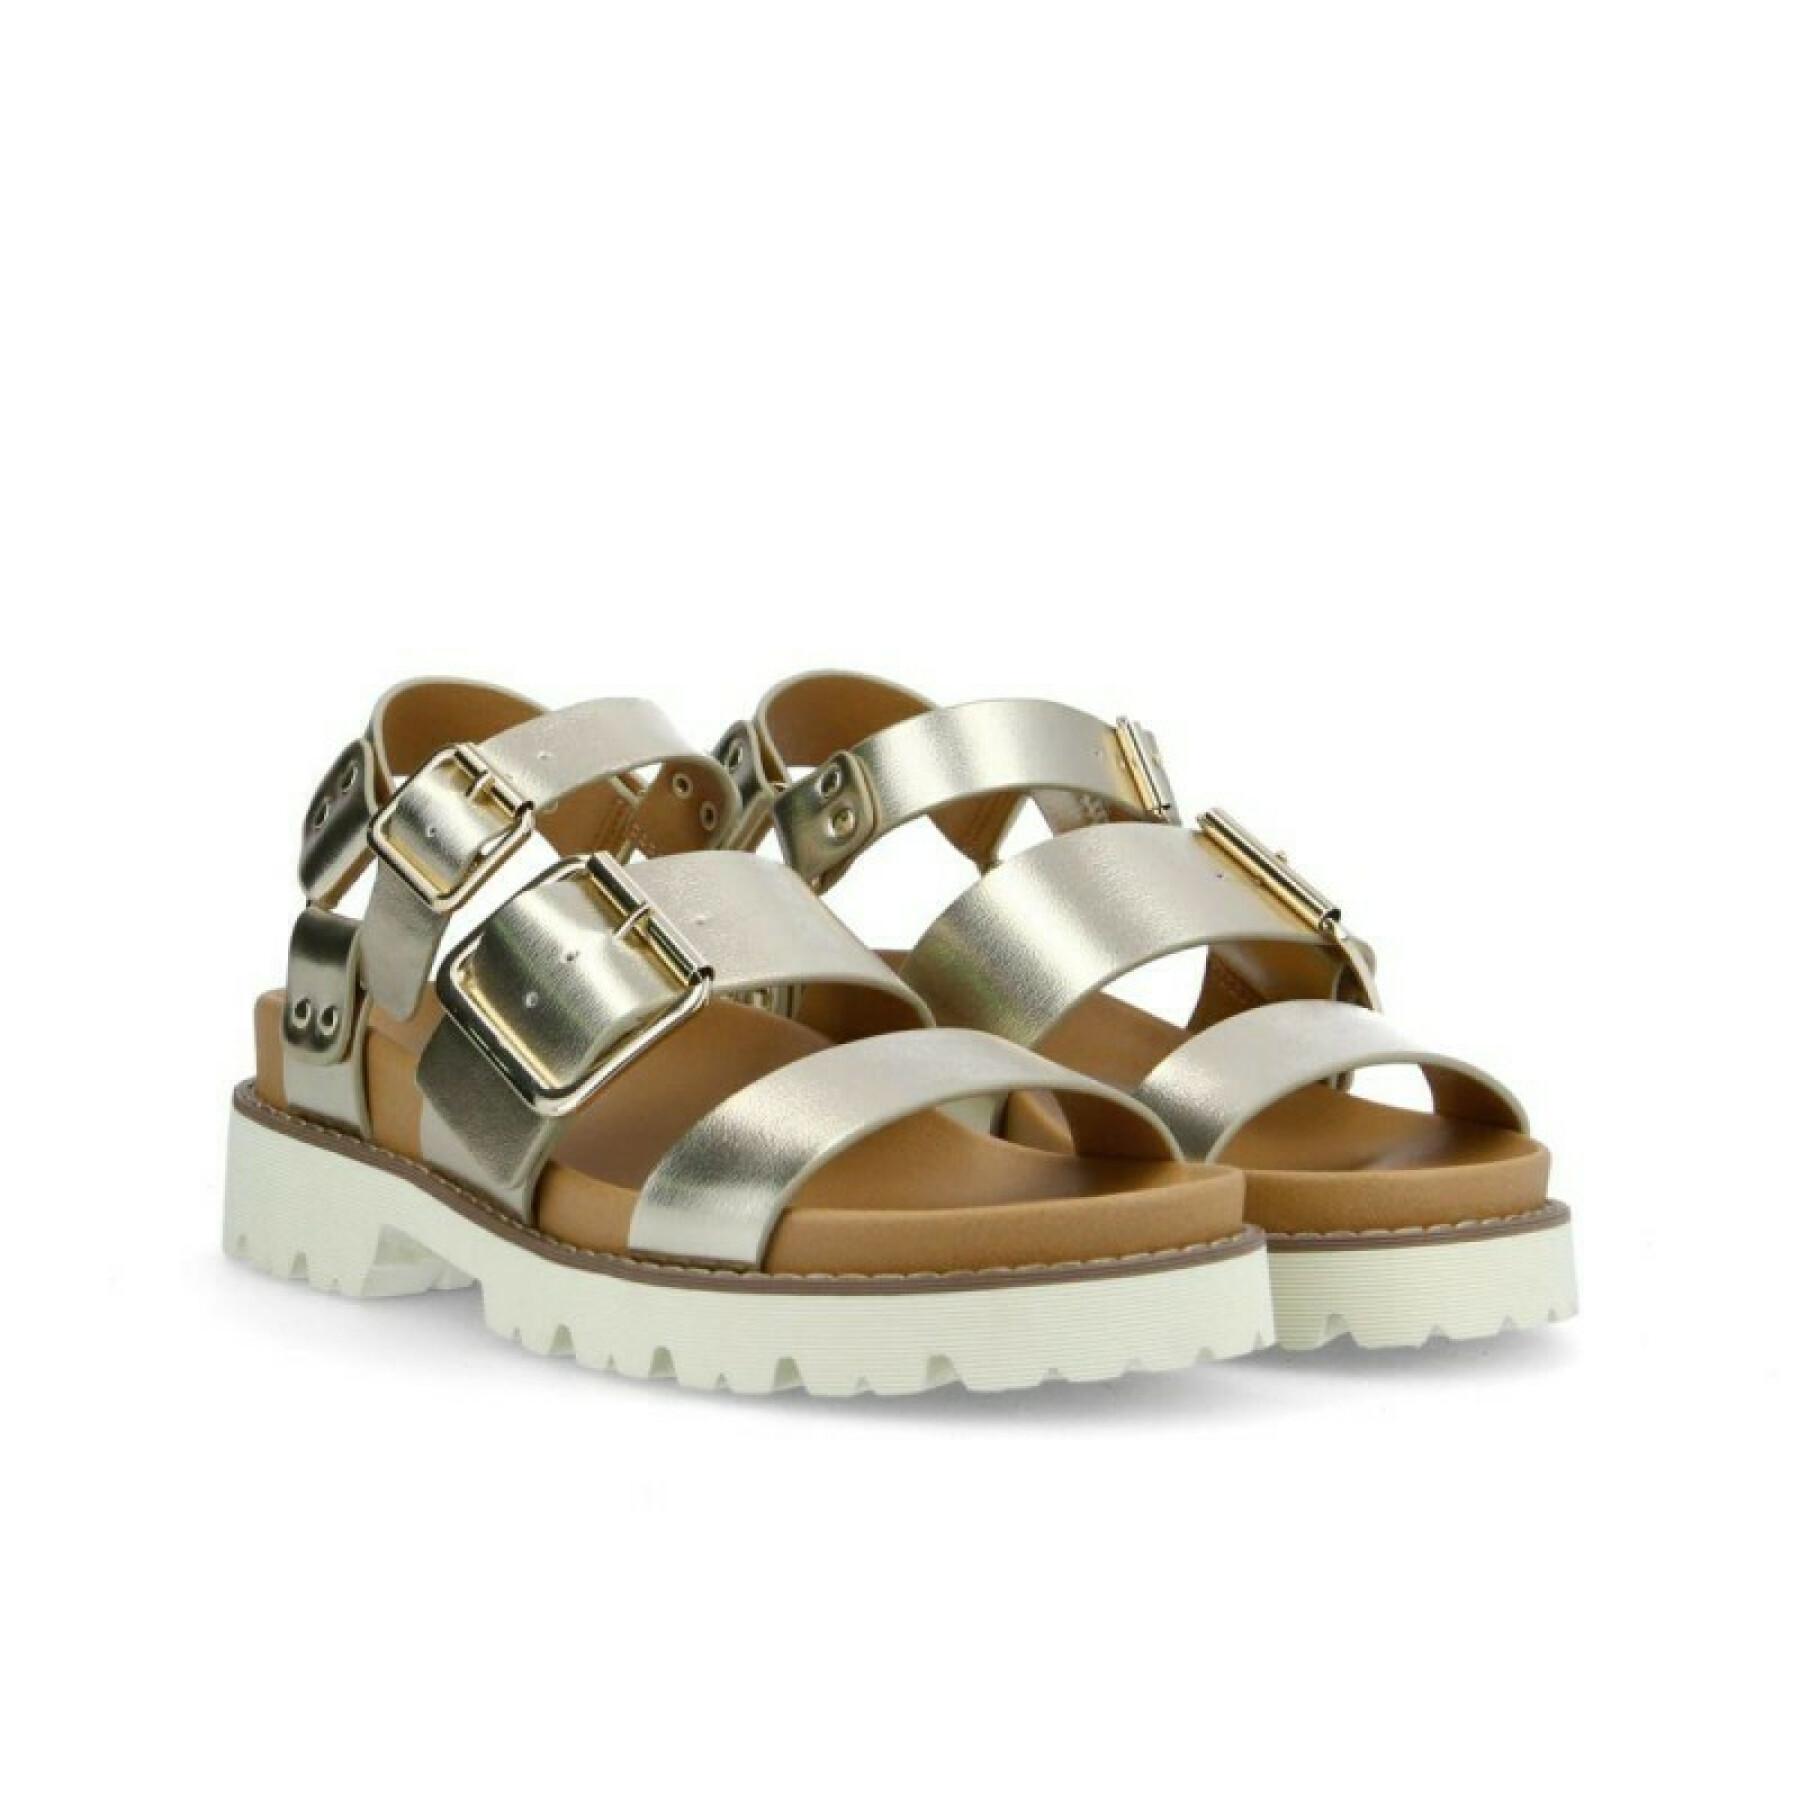 Women's sandals No Name June ankle galaxie recycld